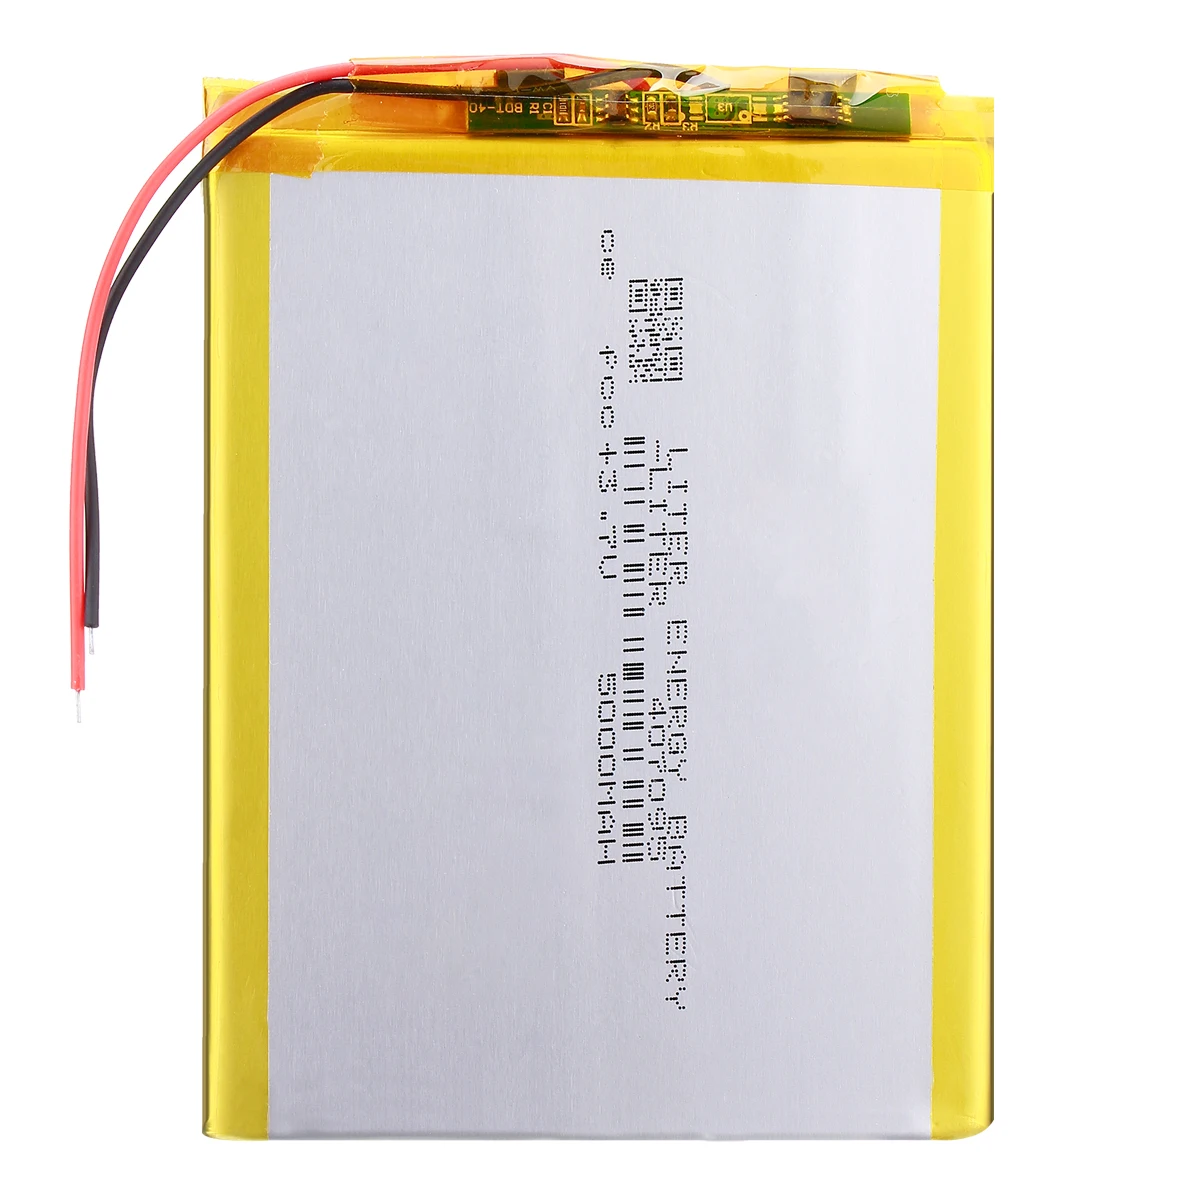 3.7V 5000mAh 407095 Lithium polymer Tablet Battery with protection board For  PC